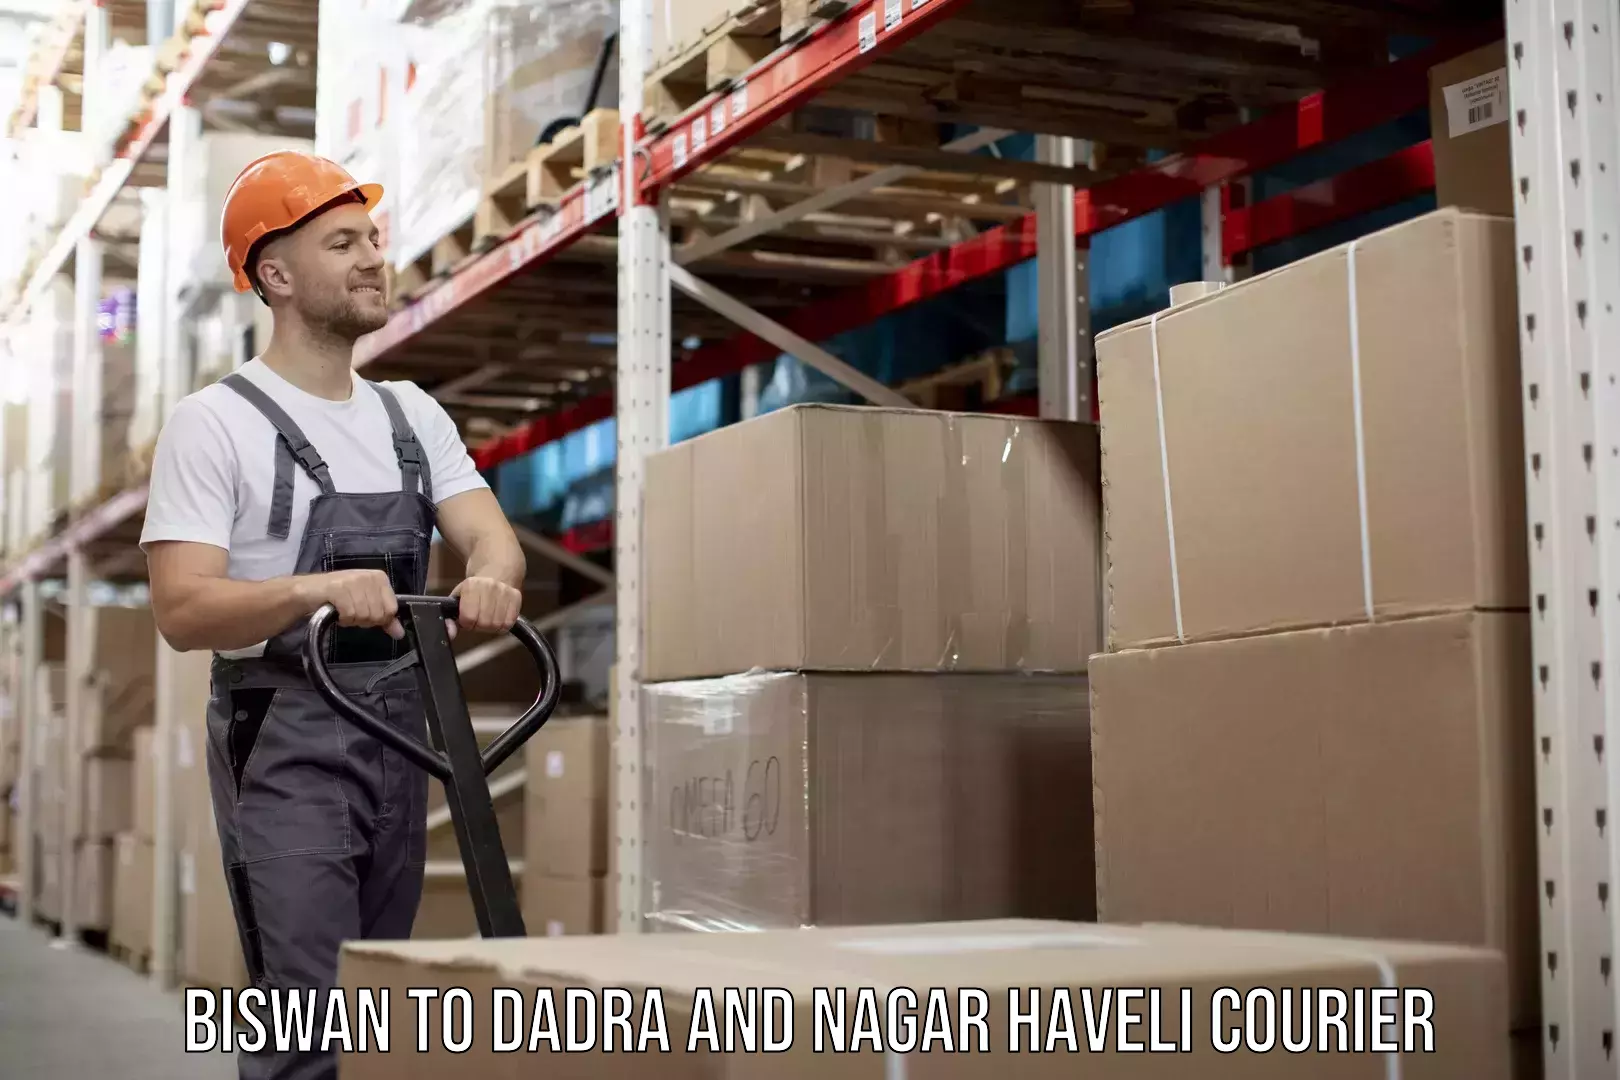 On-call courier service Biswan to Dadra and Nagar Haveli